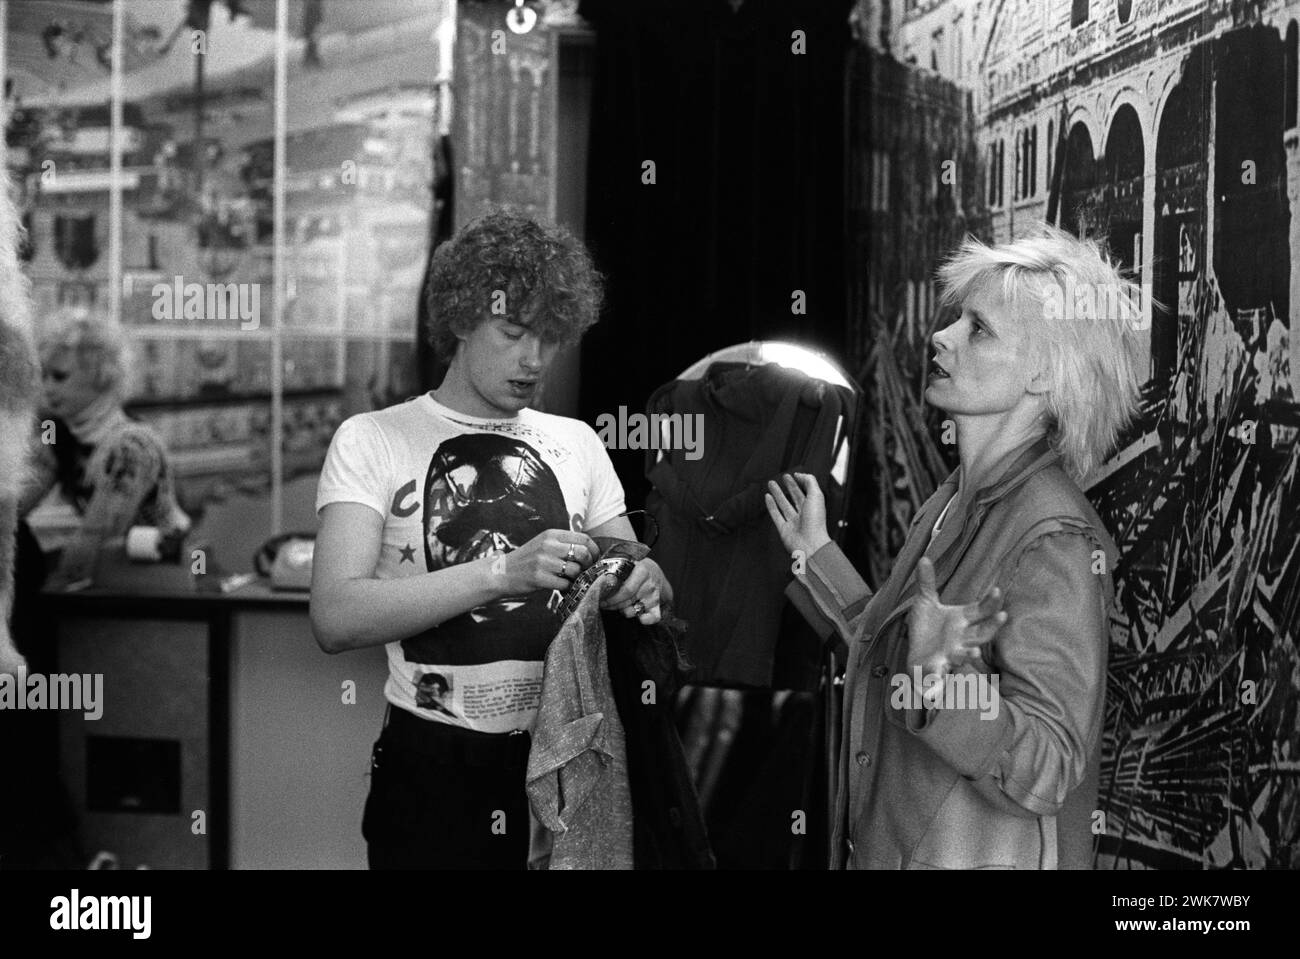 Vivienne Westwood wearing a felt Inside Out Jacket in her shop Seditionaries in the Kings Road Chelsea. Shop assistants Michael Collins who wears Cambridge Rapist design T shirt, produced by Westwood’s partner Malcolm McLaren a couple of years earlier. Chelsea, London, England 1977 1970s UK HOMER SYKES Stock Photo